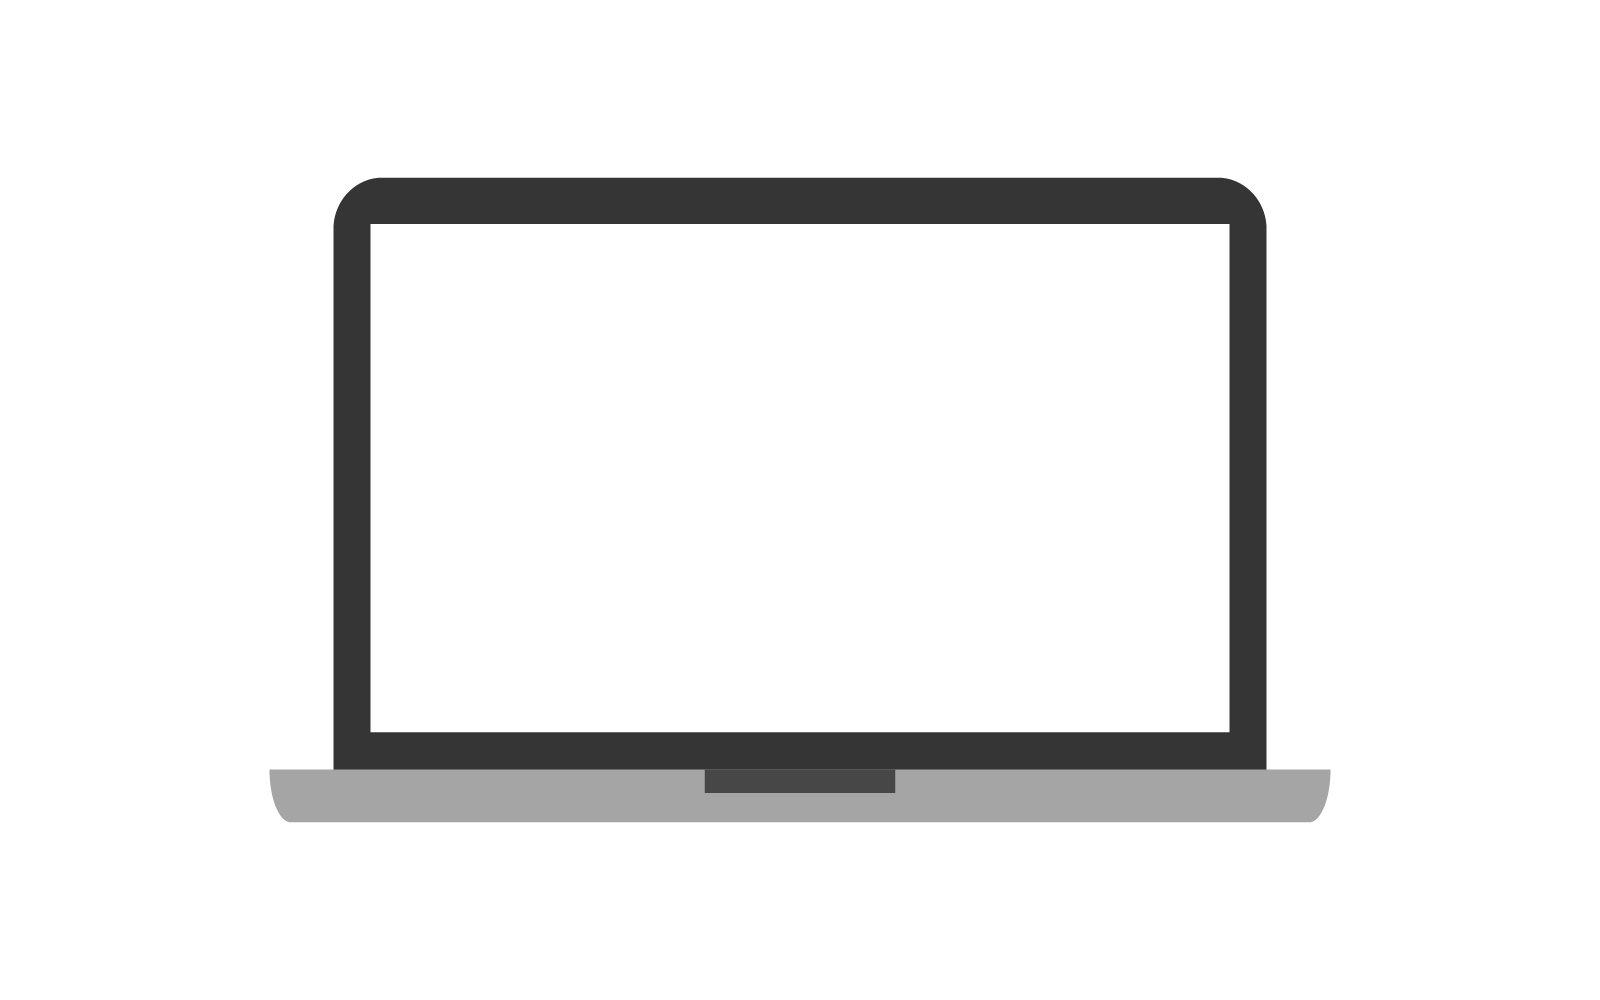 Laptop illustrated on a white background in vector